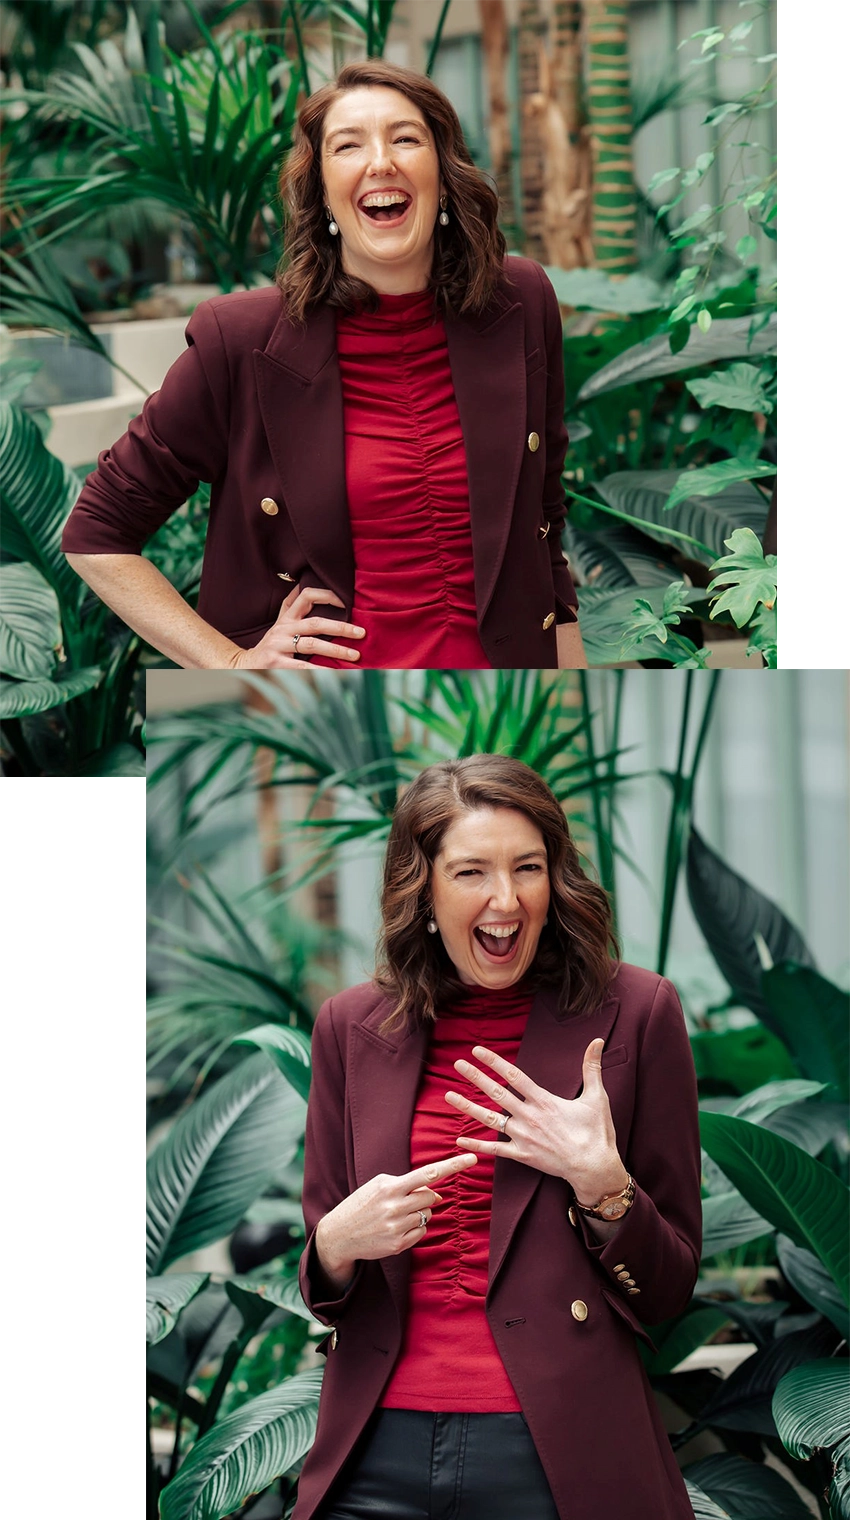 Two photos of Pippa, The first she is standing, hand on hip and casually laughing, the second she is excitedly pointing at her engagement ring